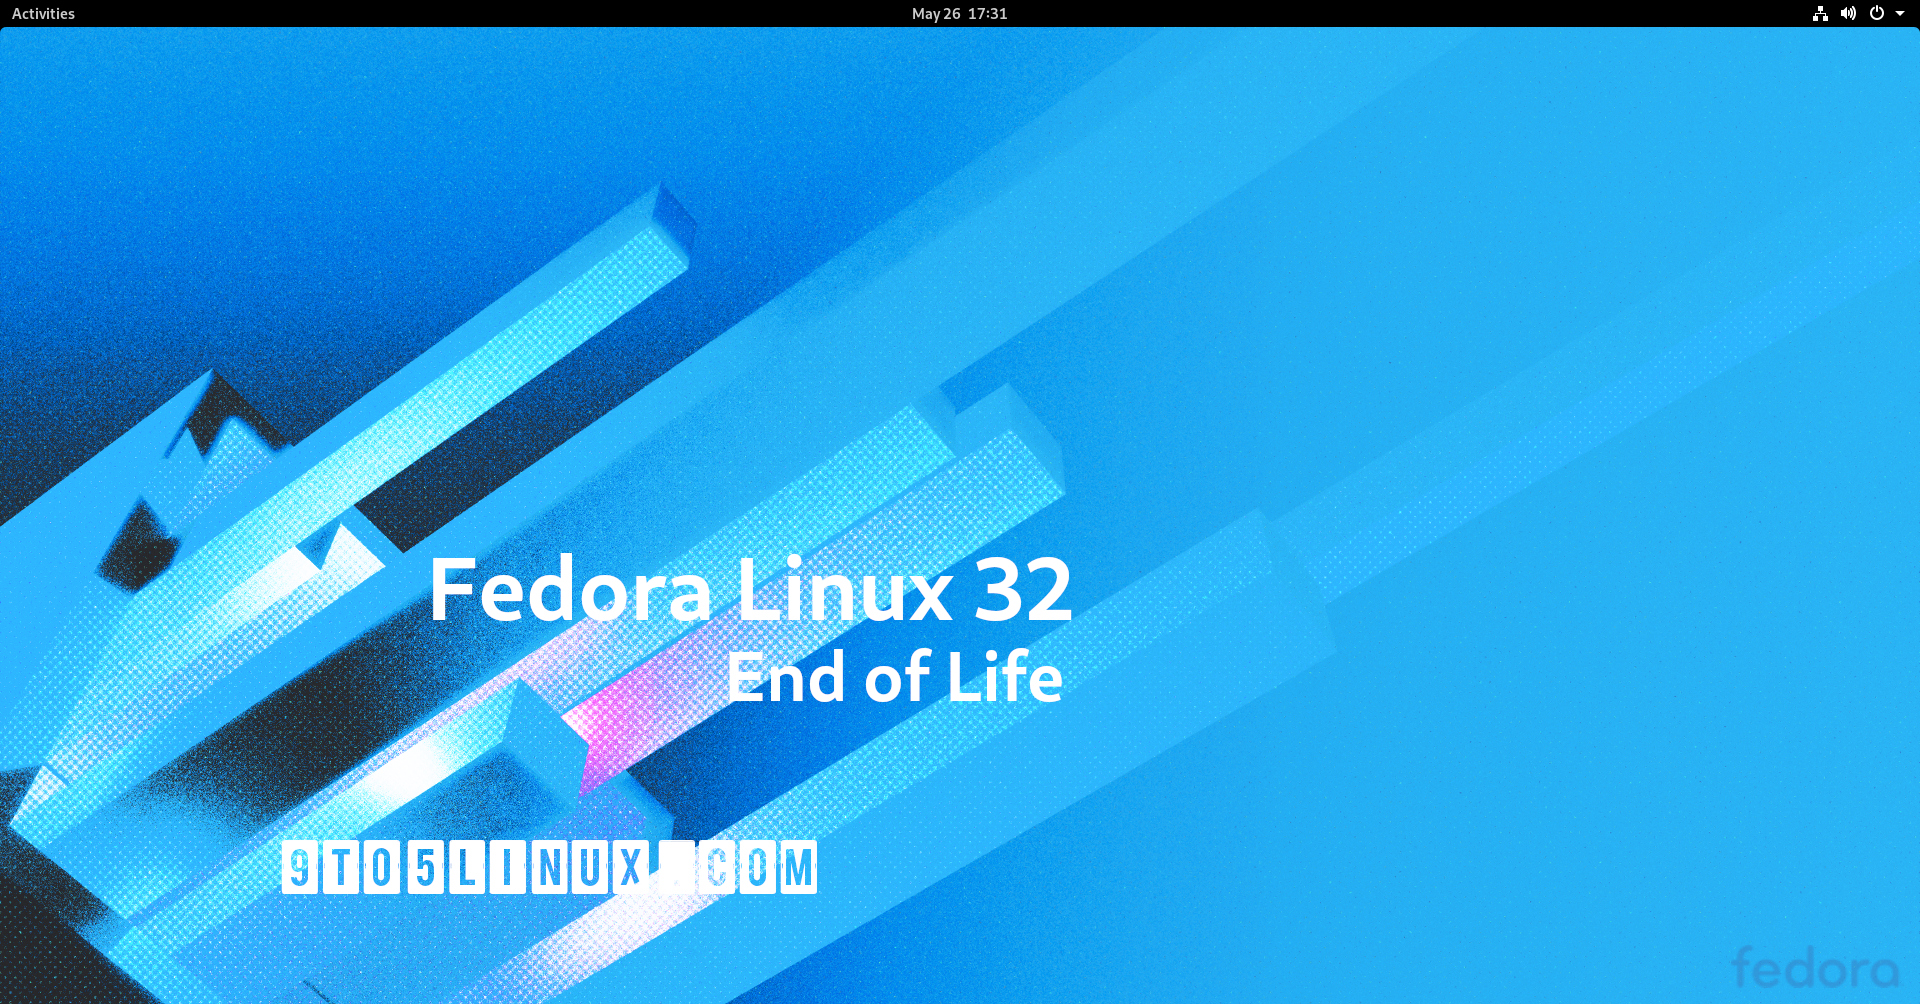 Fedora Linux 32 Reached End of Life, Upgrade to Fedora Linux 34 Now